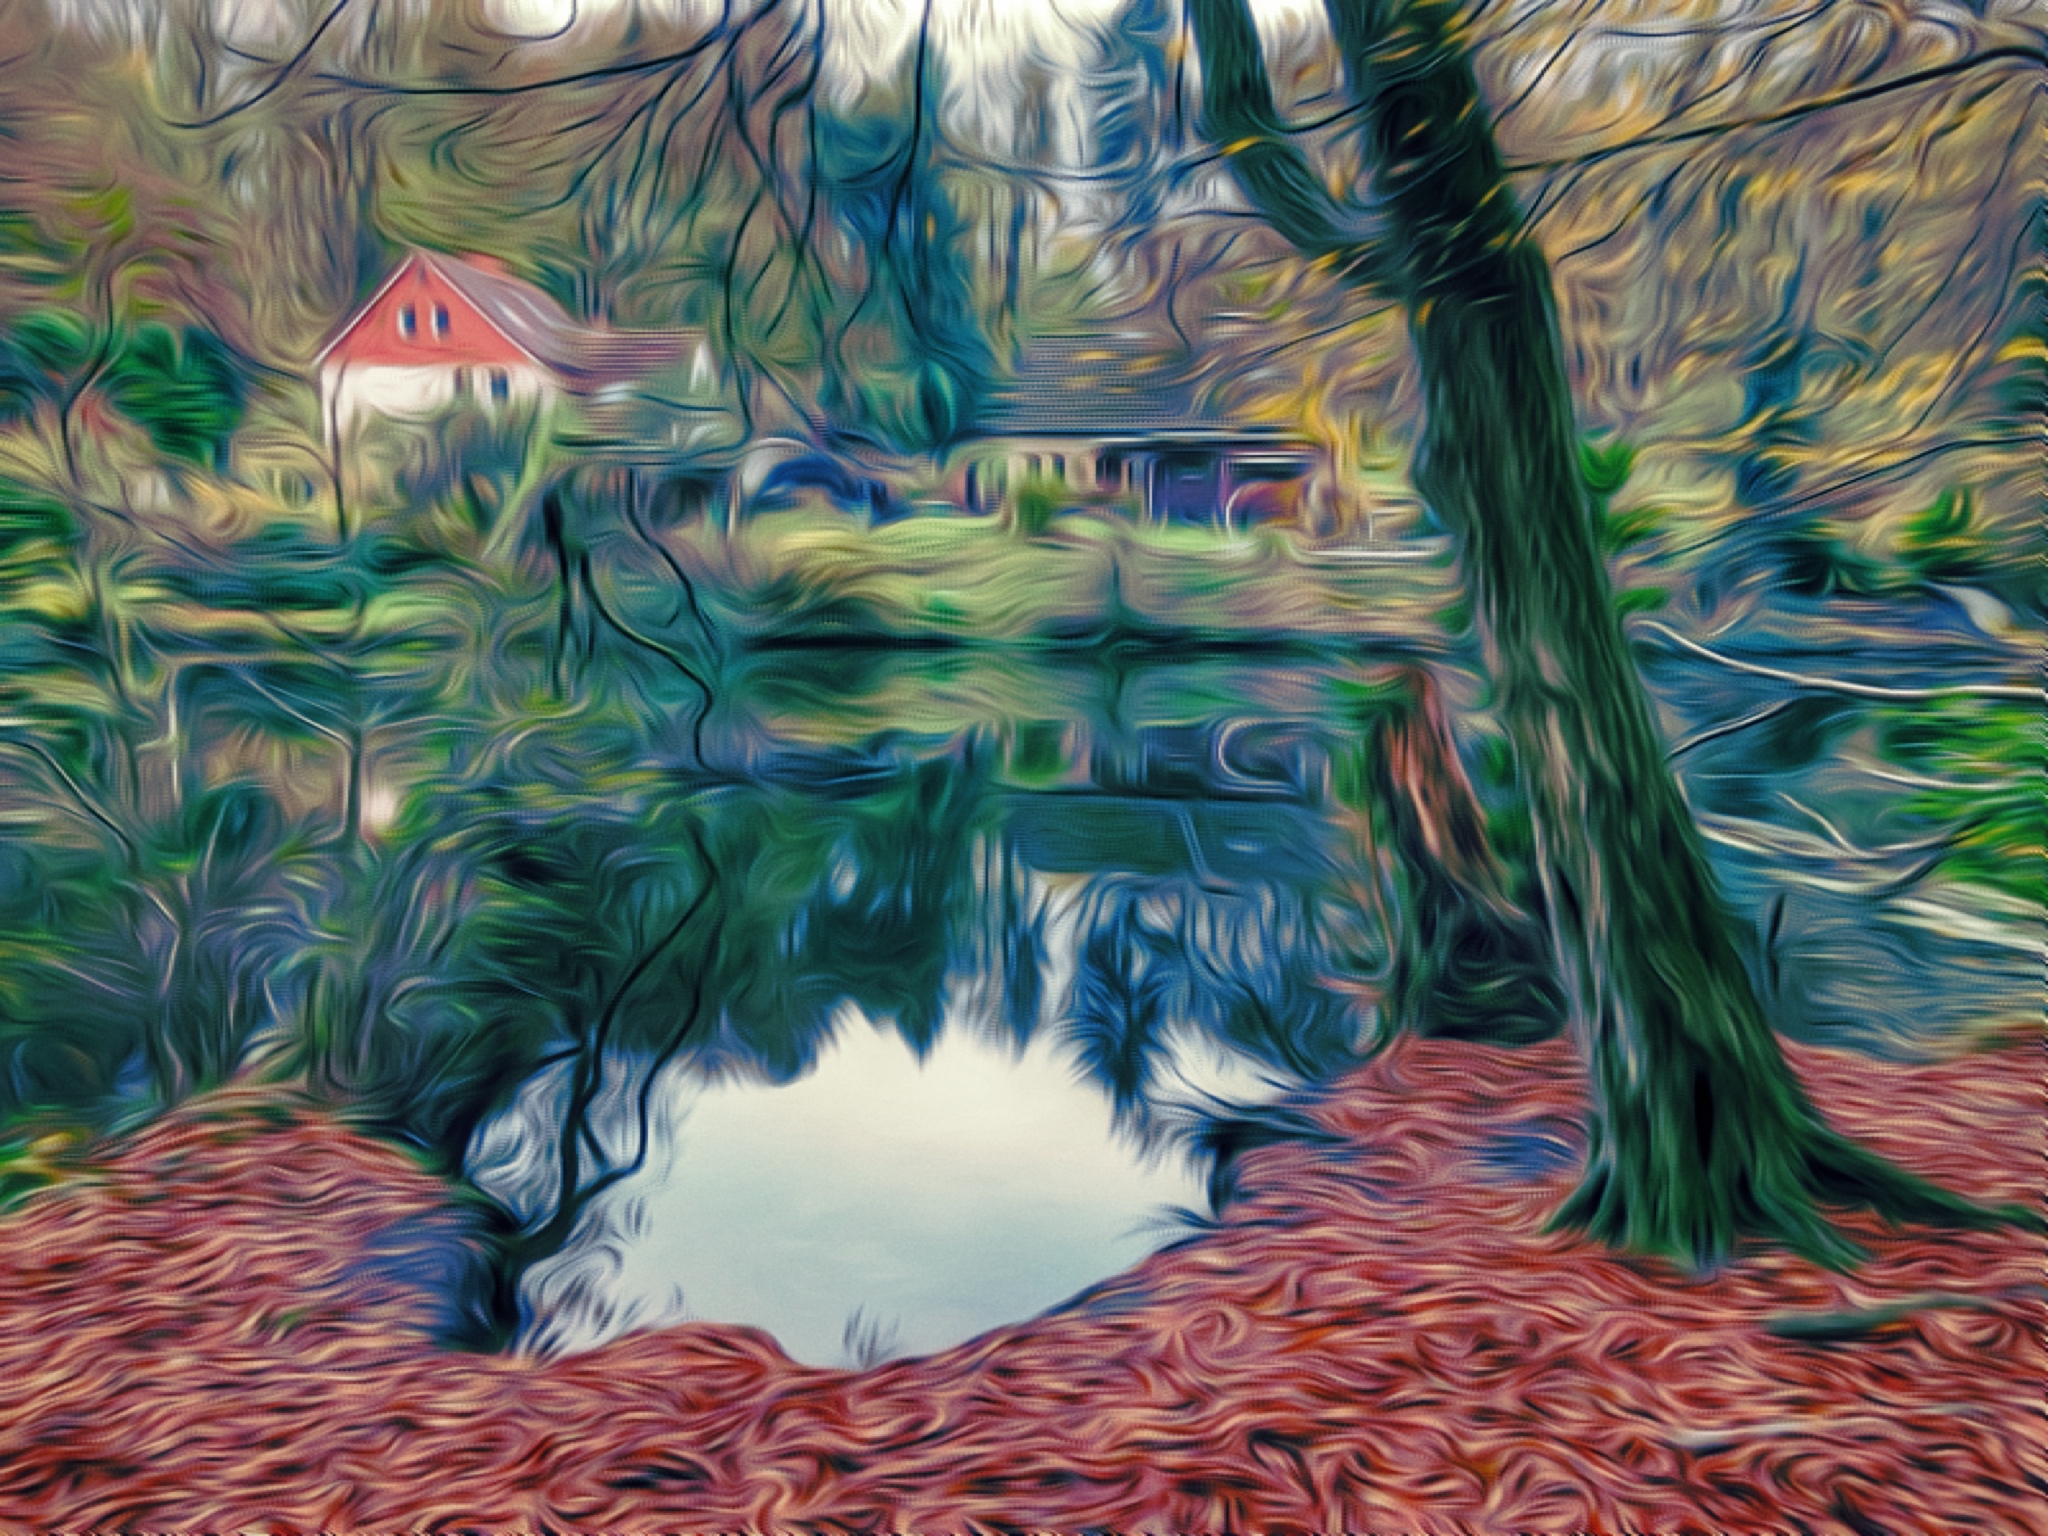 Wandering as Impressionists through the autumnal Schwentine